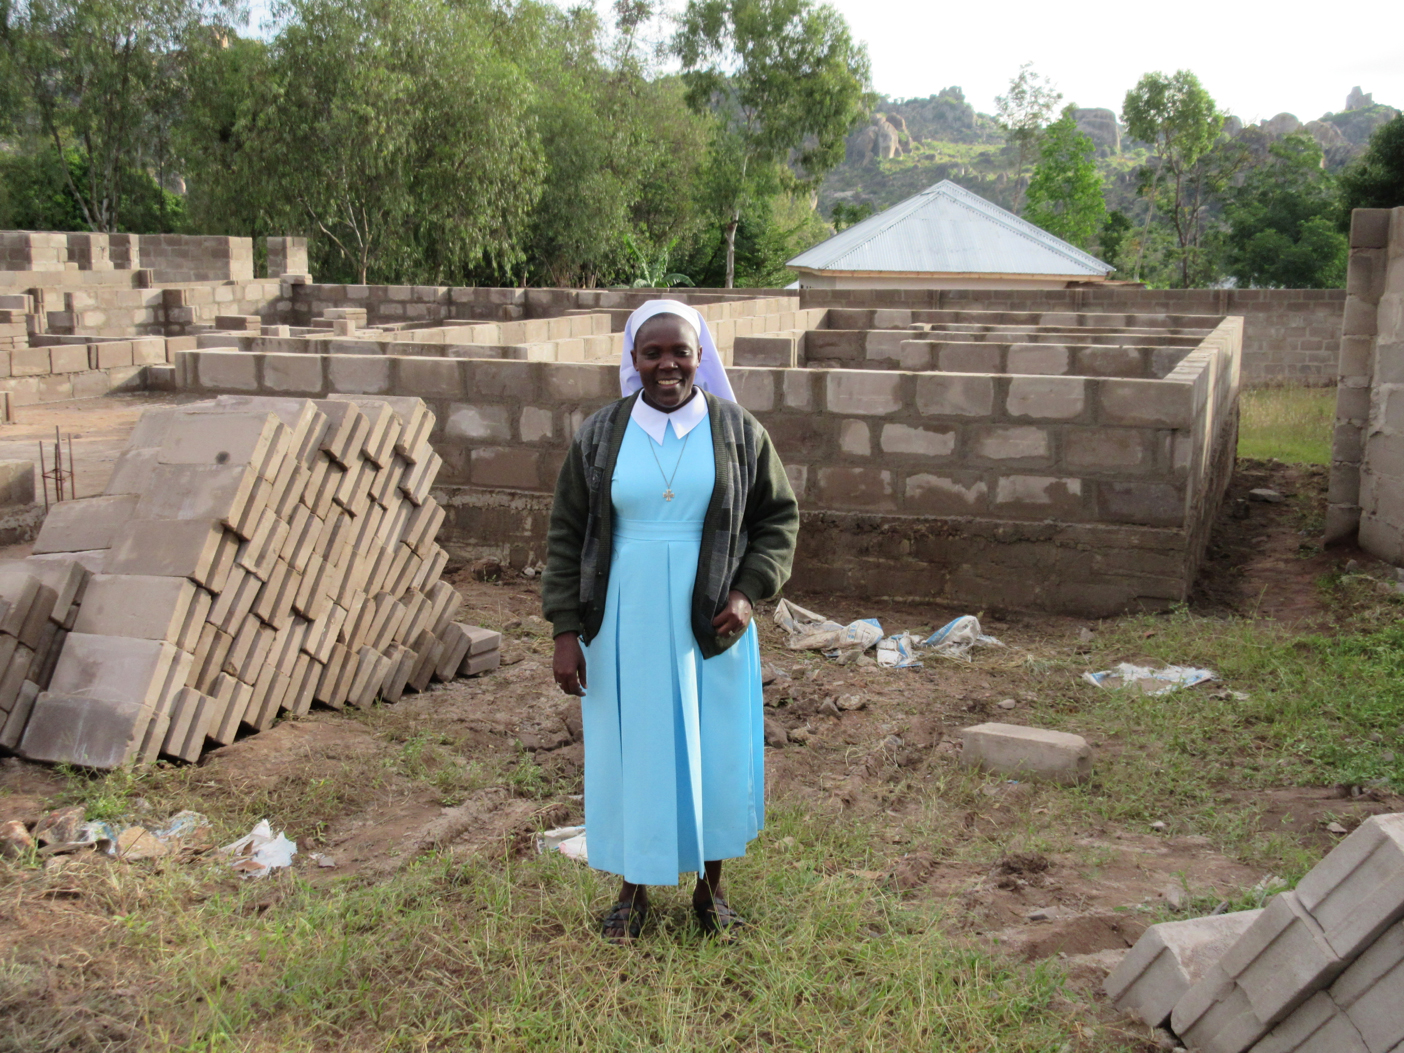 In 2014 Sister Sabina Kabuga stands in front of the foundation for the Divine Mercy Convent, which was constructed after an initial $15,000 donation by St. John the Bapist Catholic Church to the Sisters of Our Lady Queen of Africa in Mwanza, Tanzania.